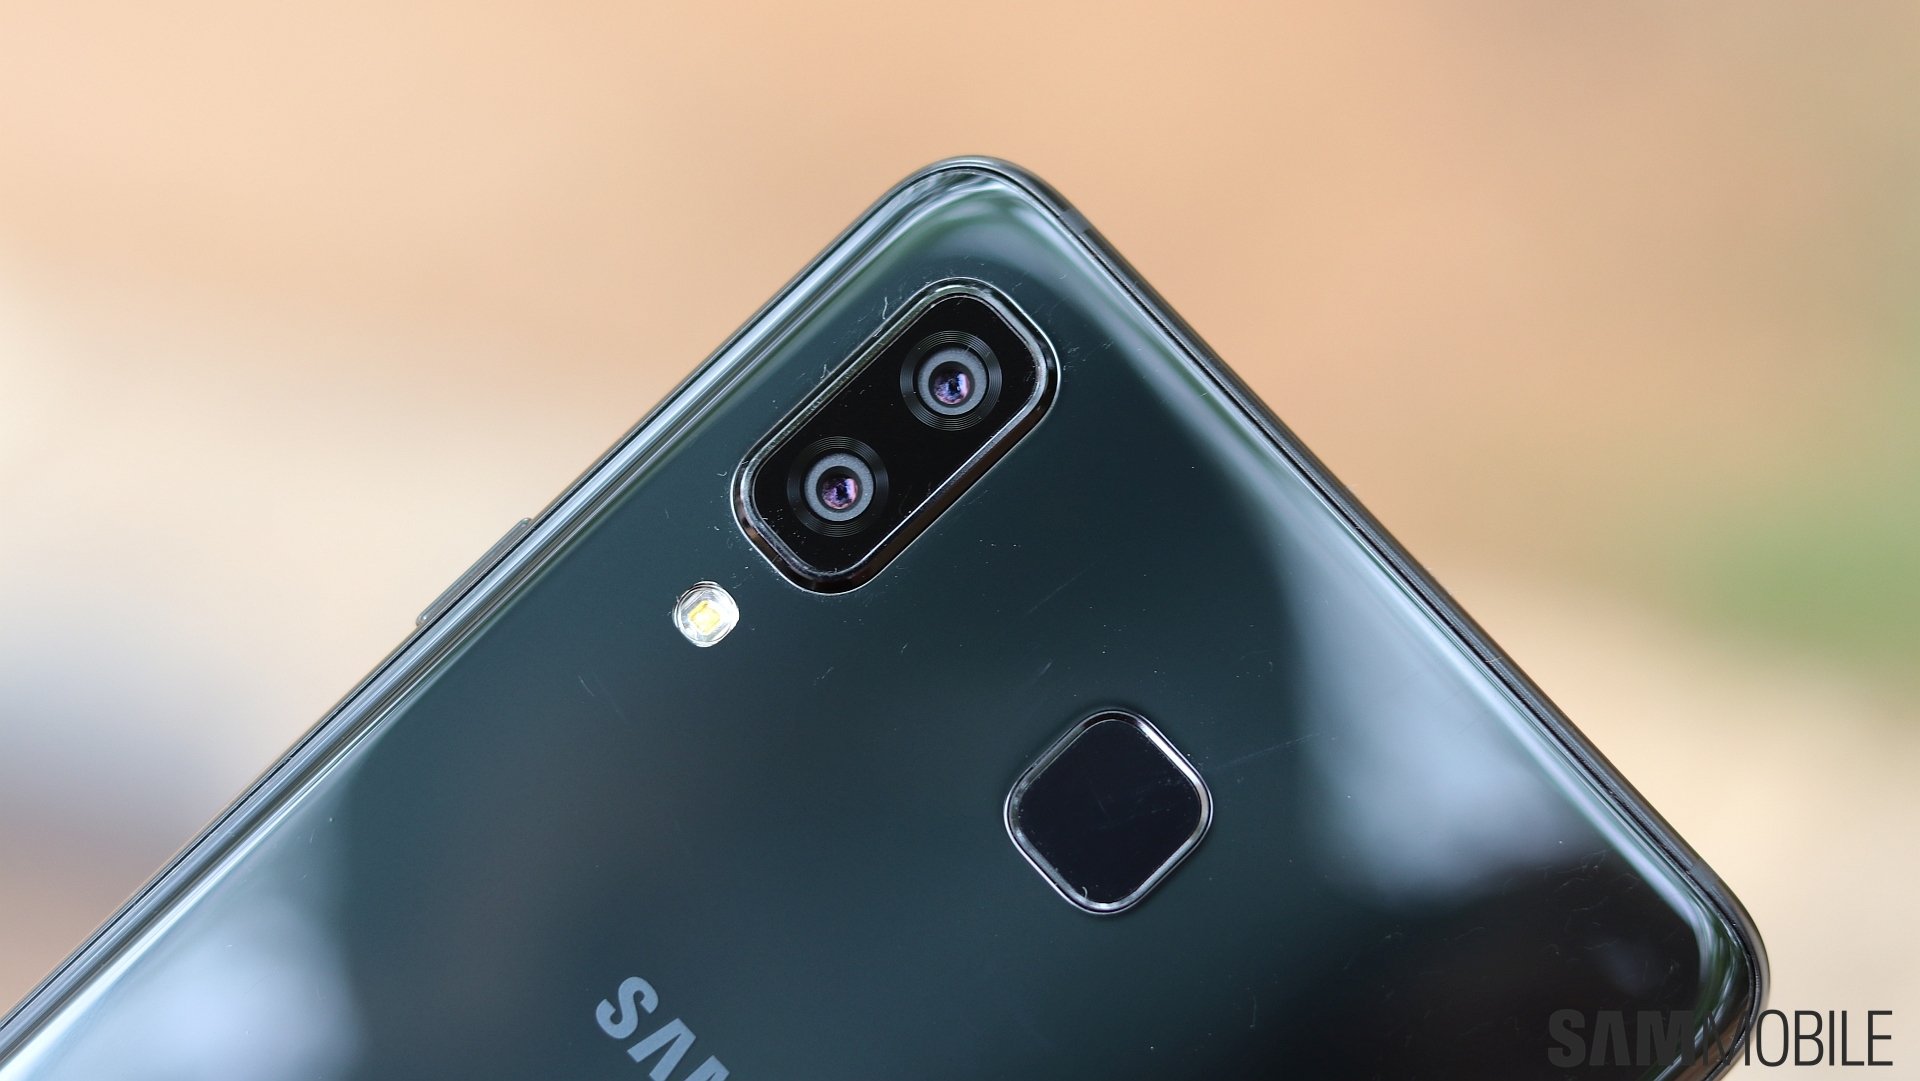 Galaxy A8 Star impresses its cameras, performance, and battery life - SamMobile